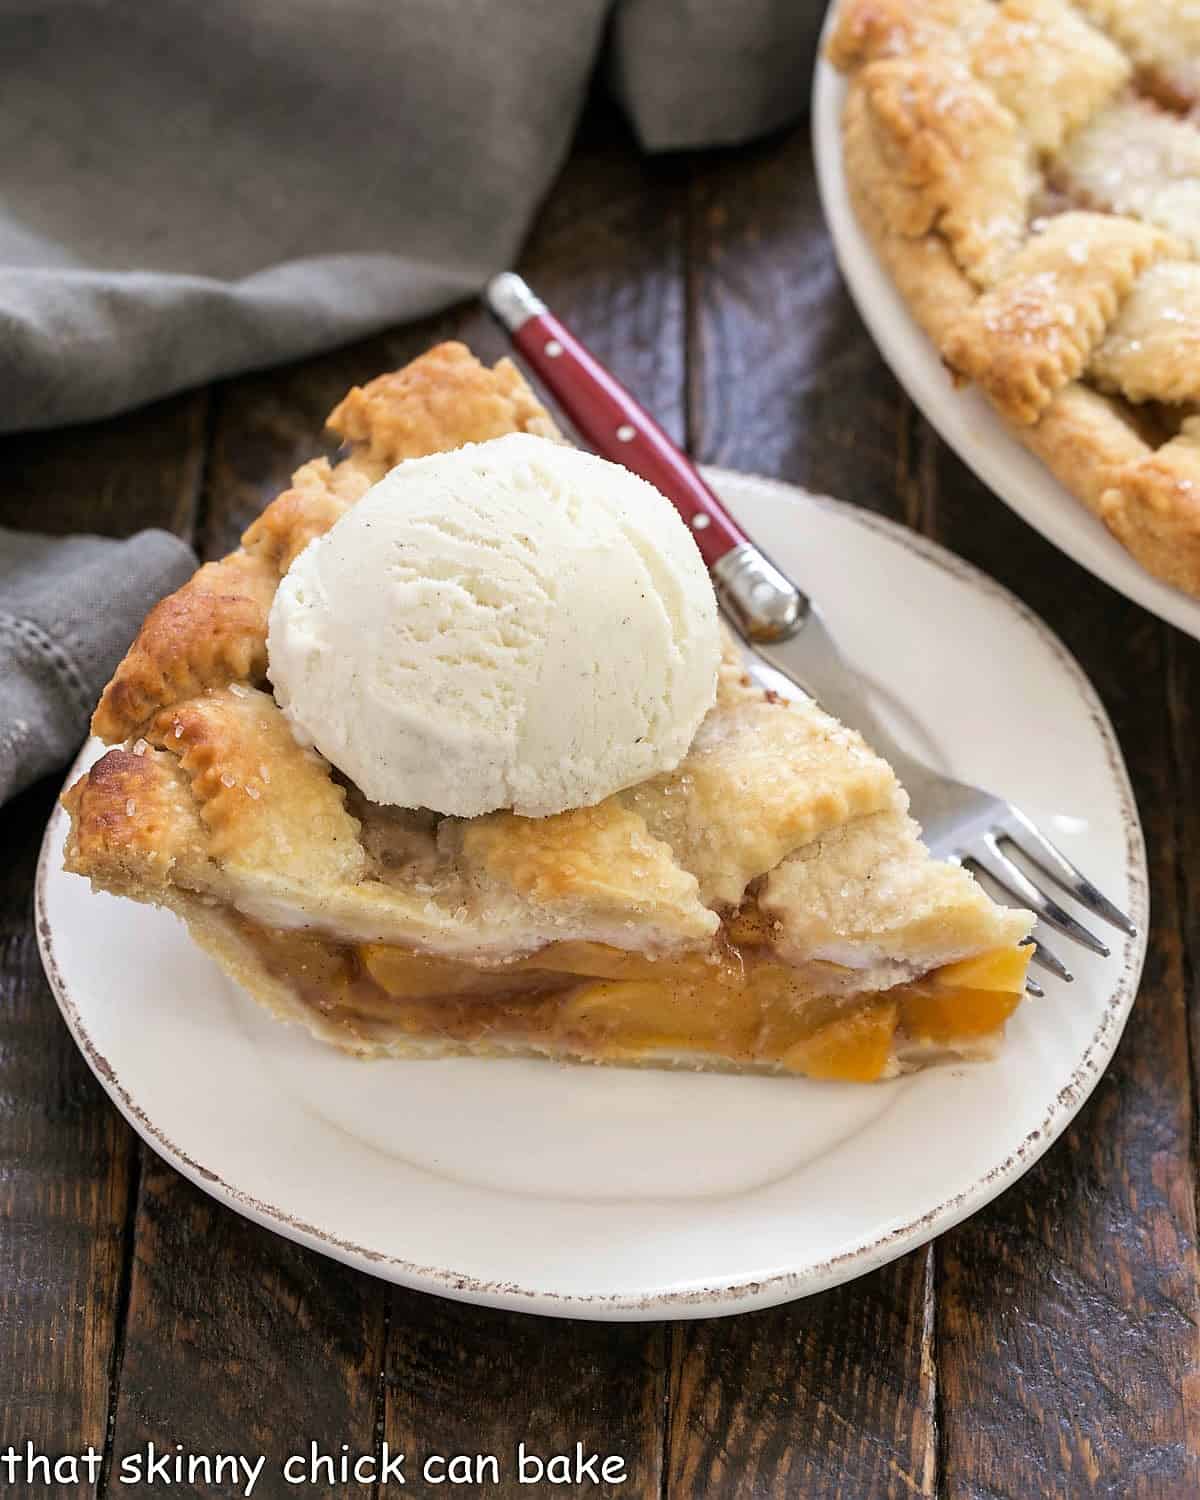 A slice of Peach Pie on a white plate with a scoop of ice cream.